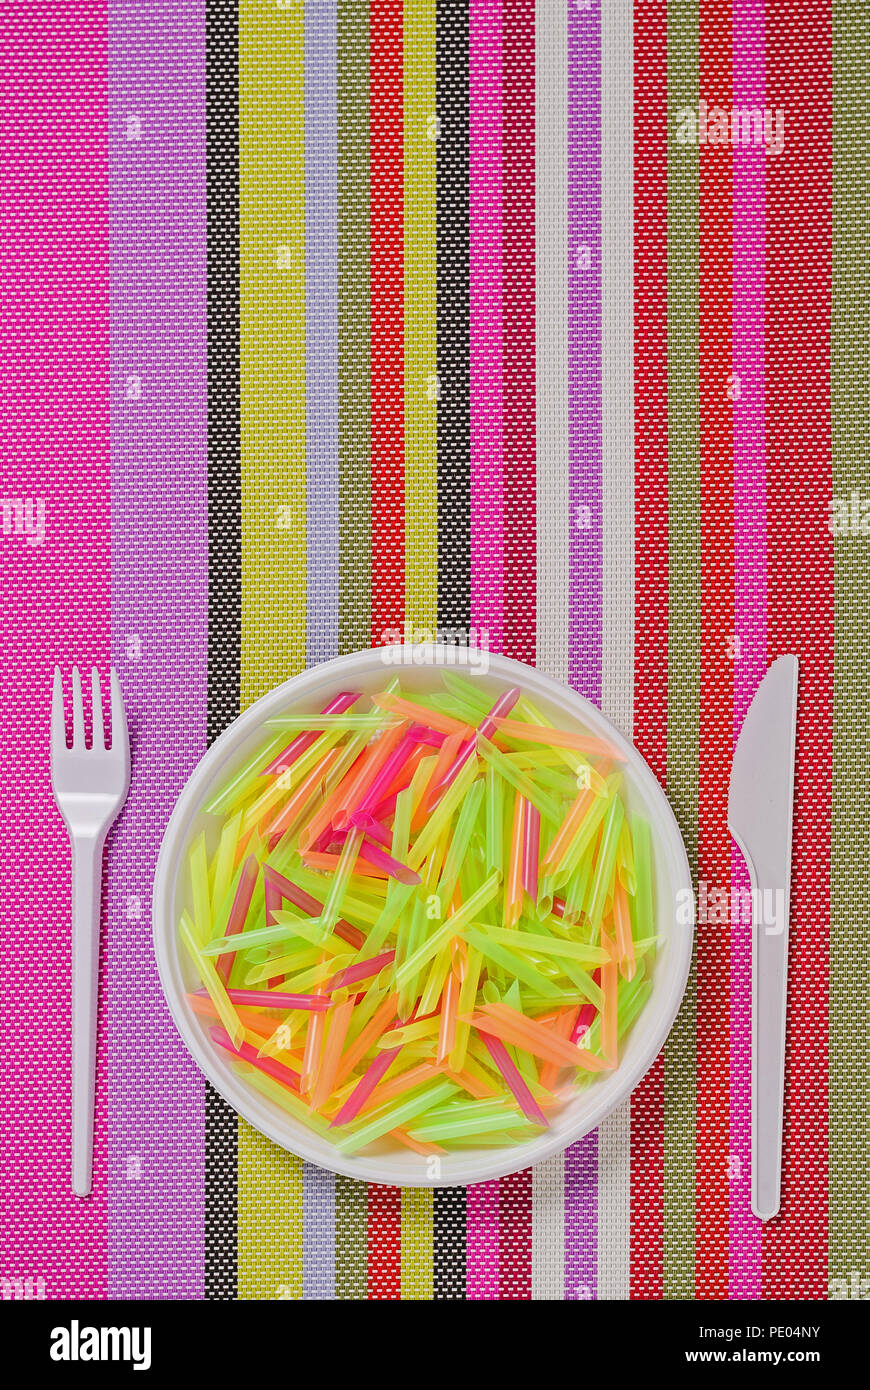 plate, fork, knife and pasta from plastic on a colored striped napkin Stock Photo